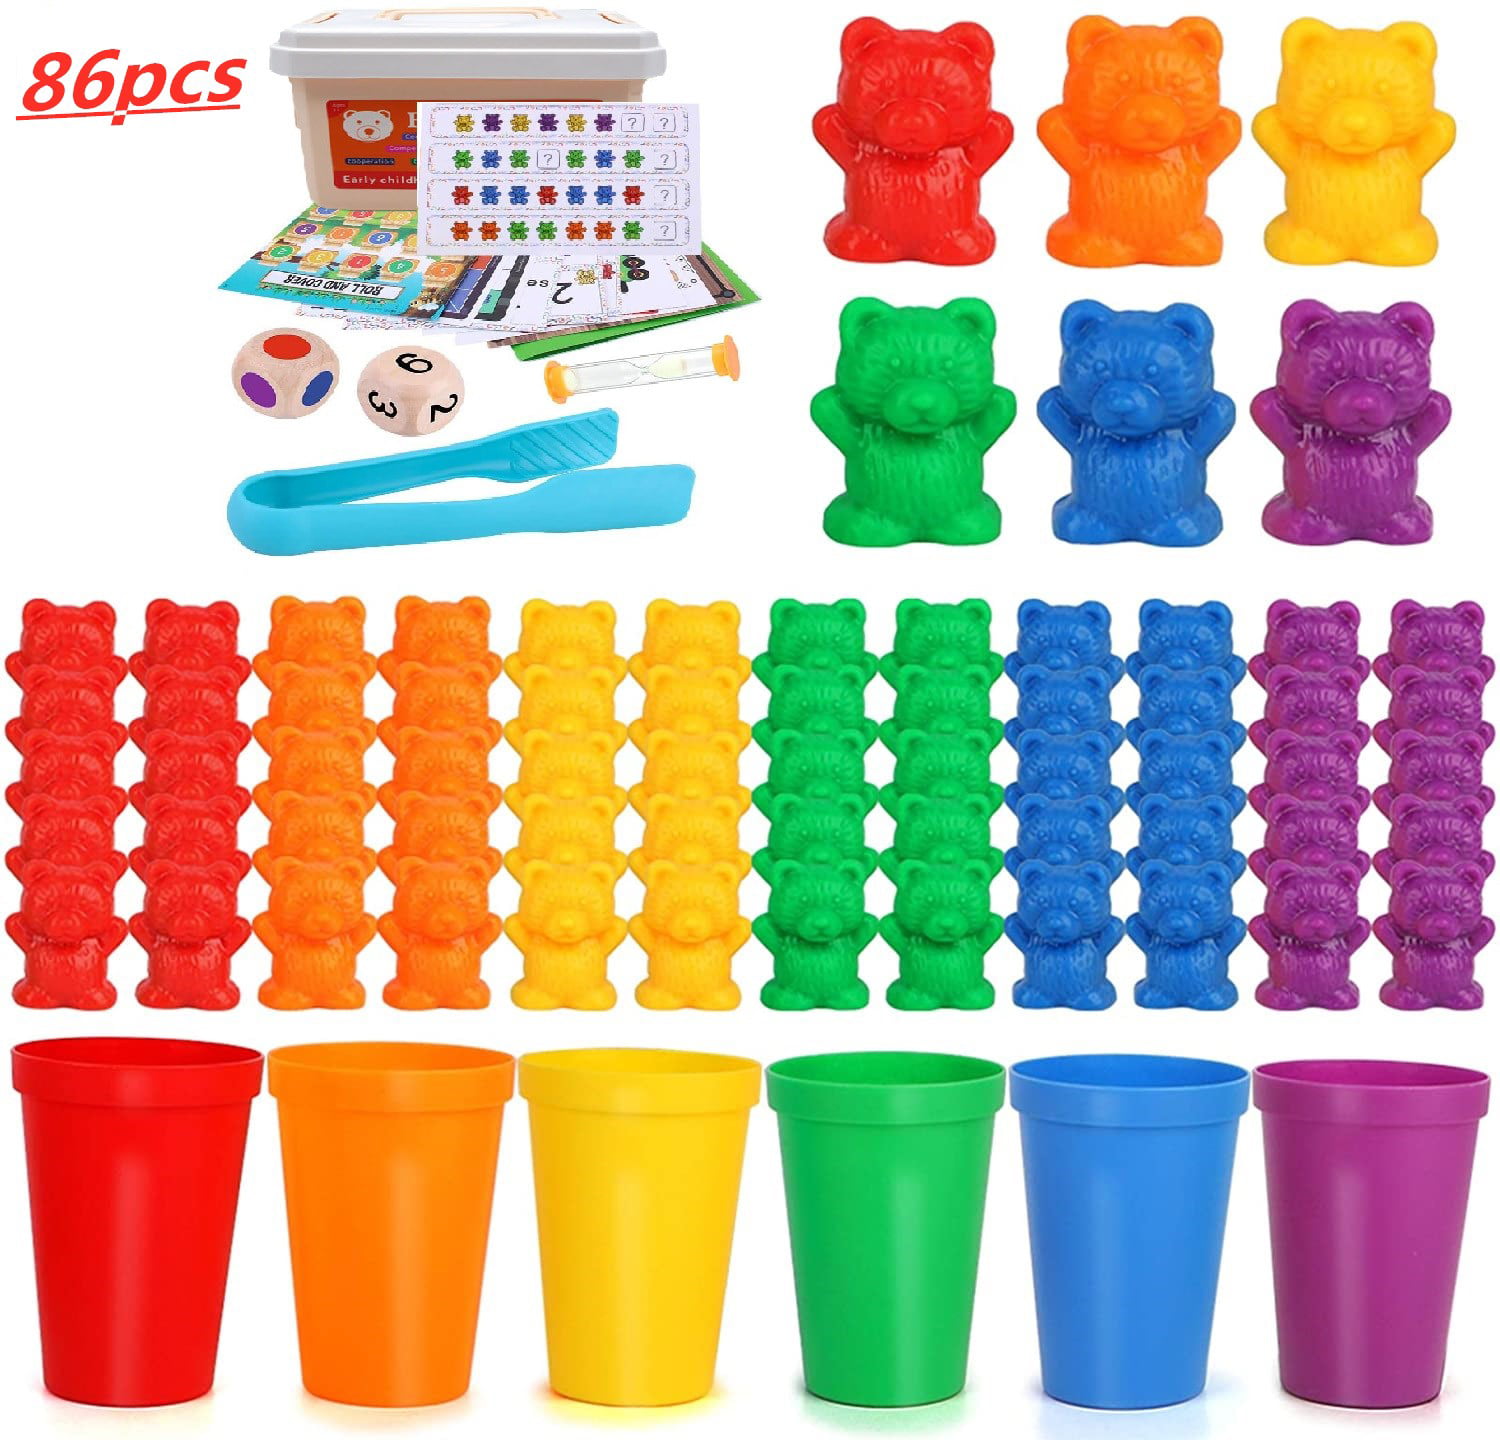 1 set Counting Bears With Stacking Cups Montessori Rainbow Matching Game, 